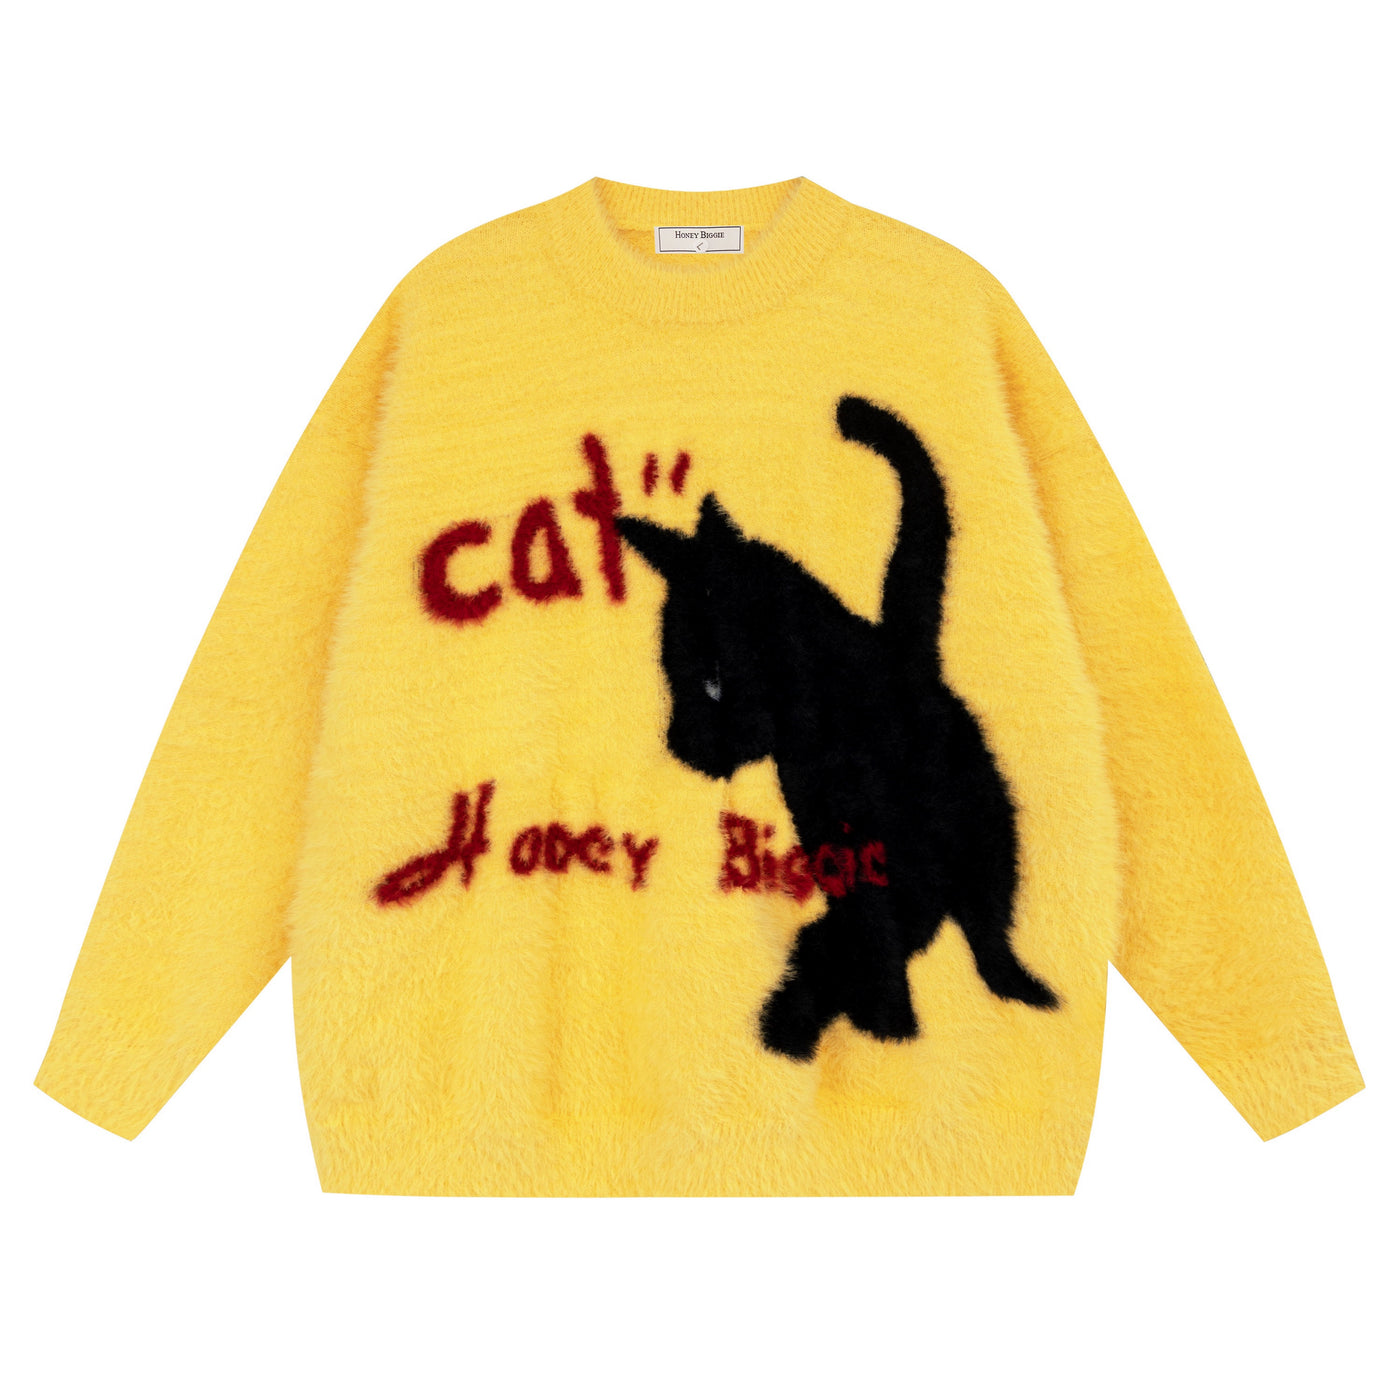 [Take off] Catboy Illustration Casual Hoover Knit Sweater TO0021